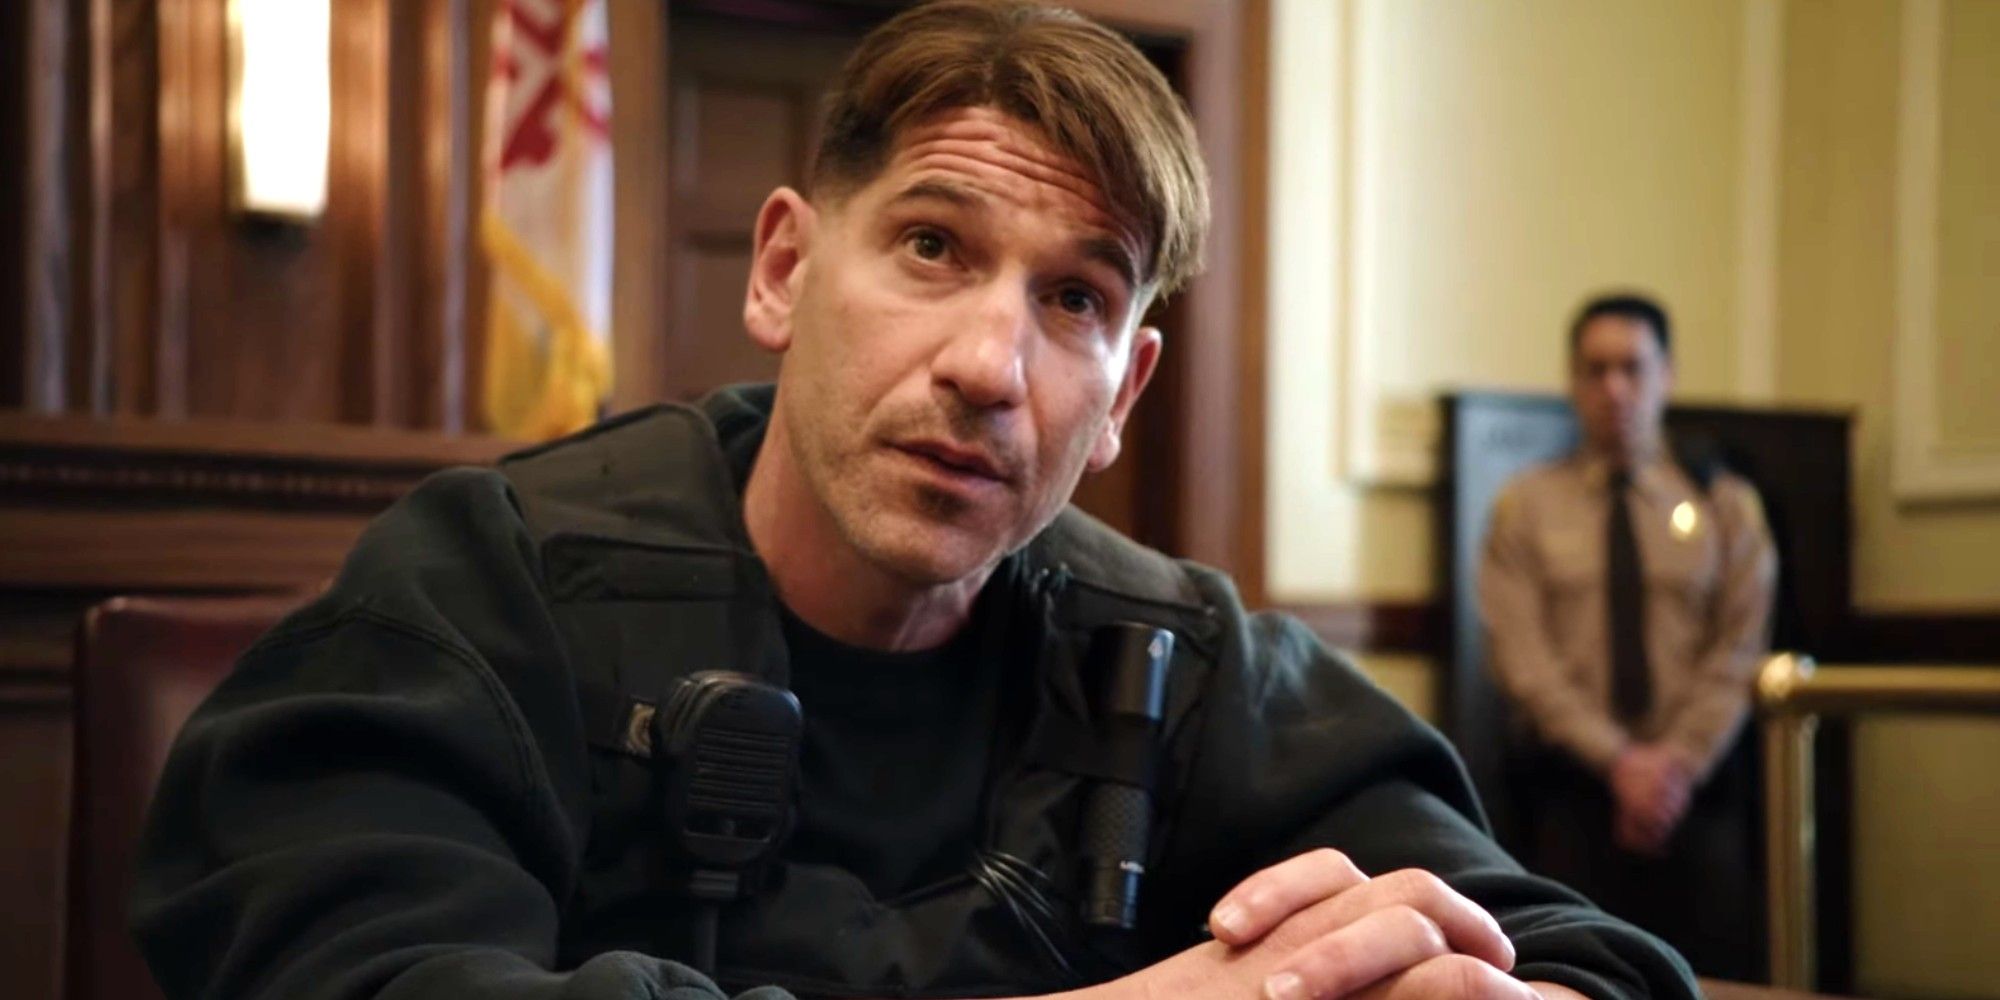 Jon Bernthal stars a corrupt cop in The Wire Writers' new show trailer ...